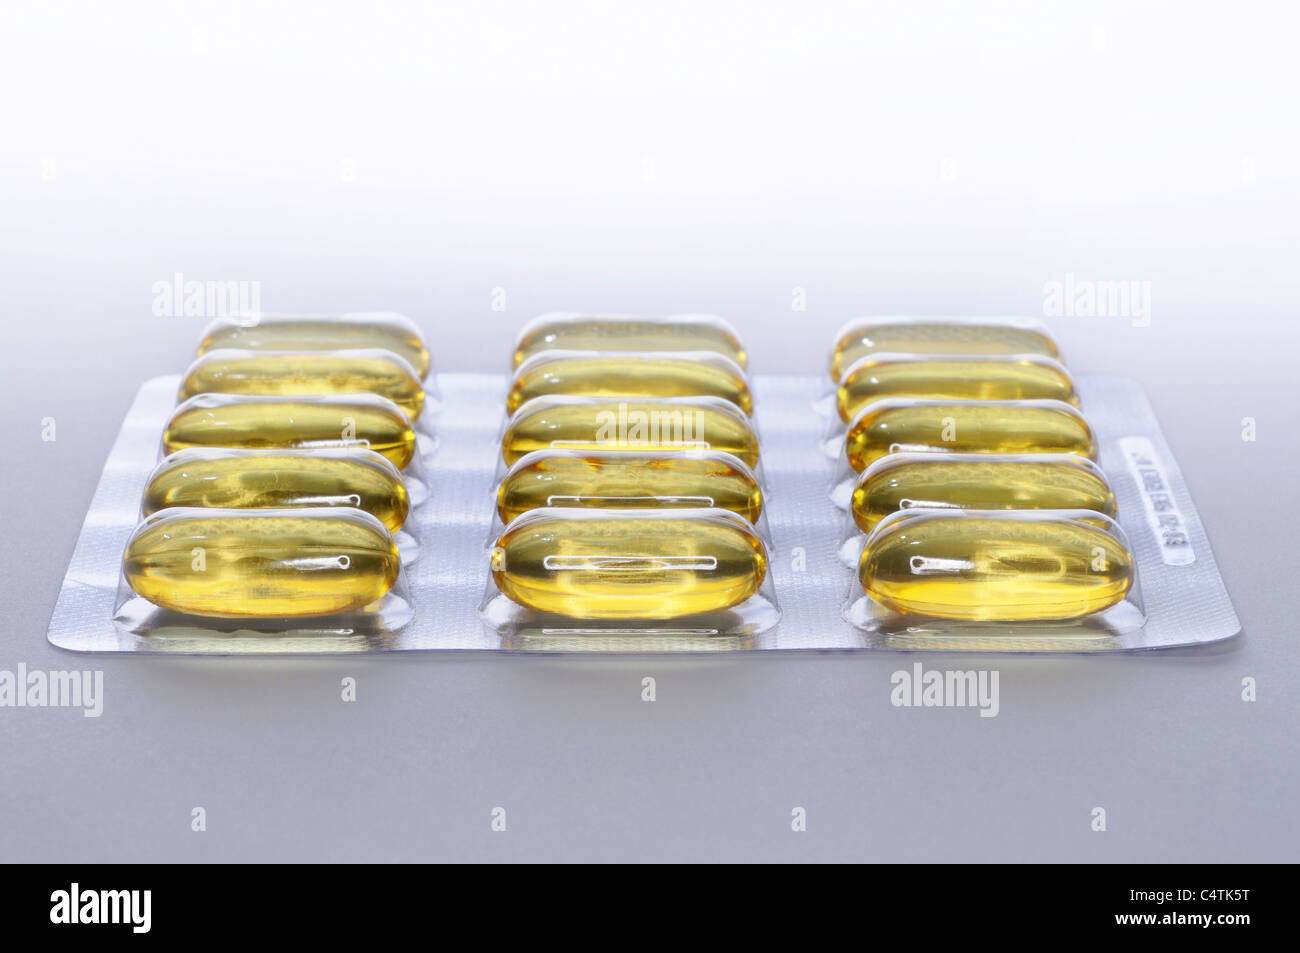 Cod liver oil capules in blister pack Stock Photo